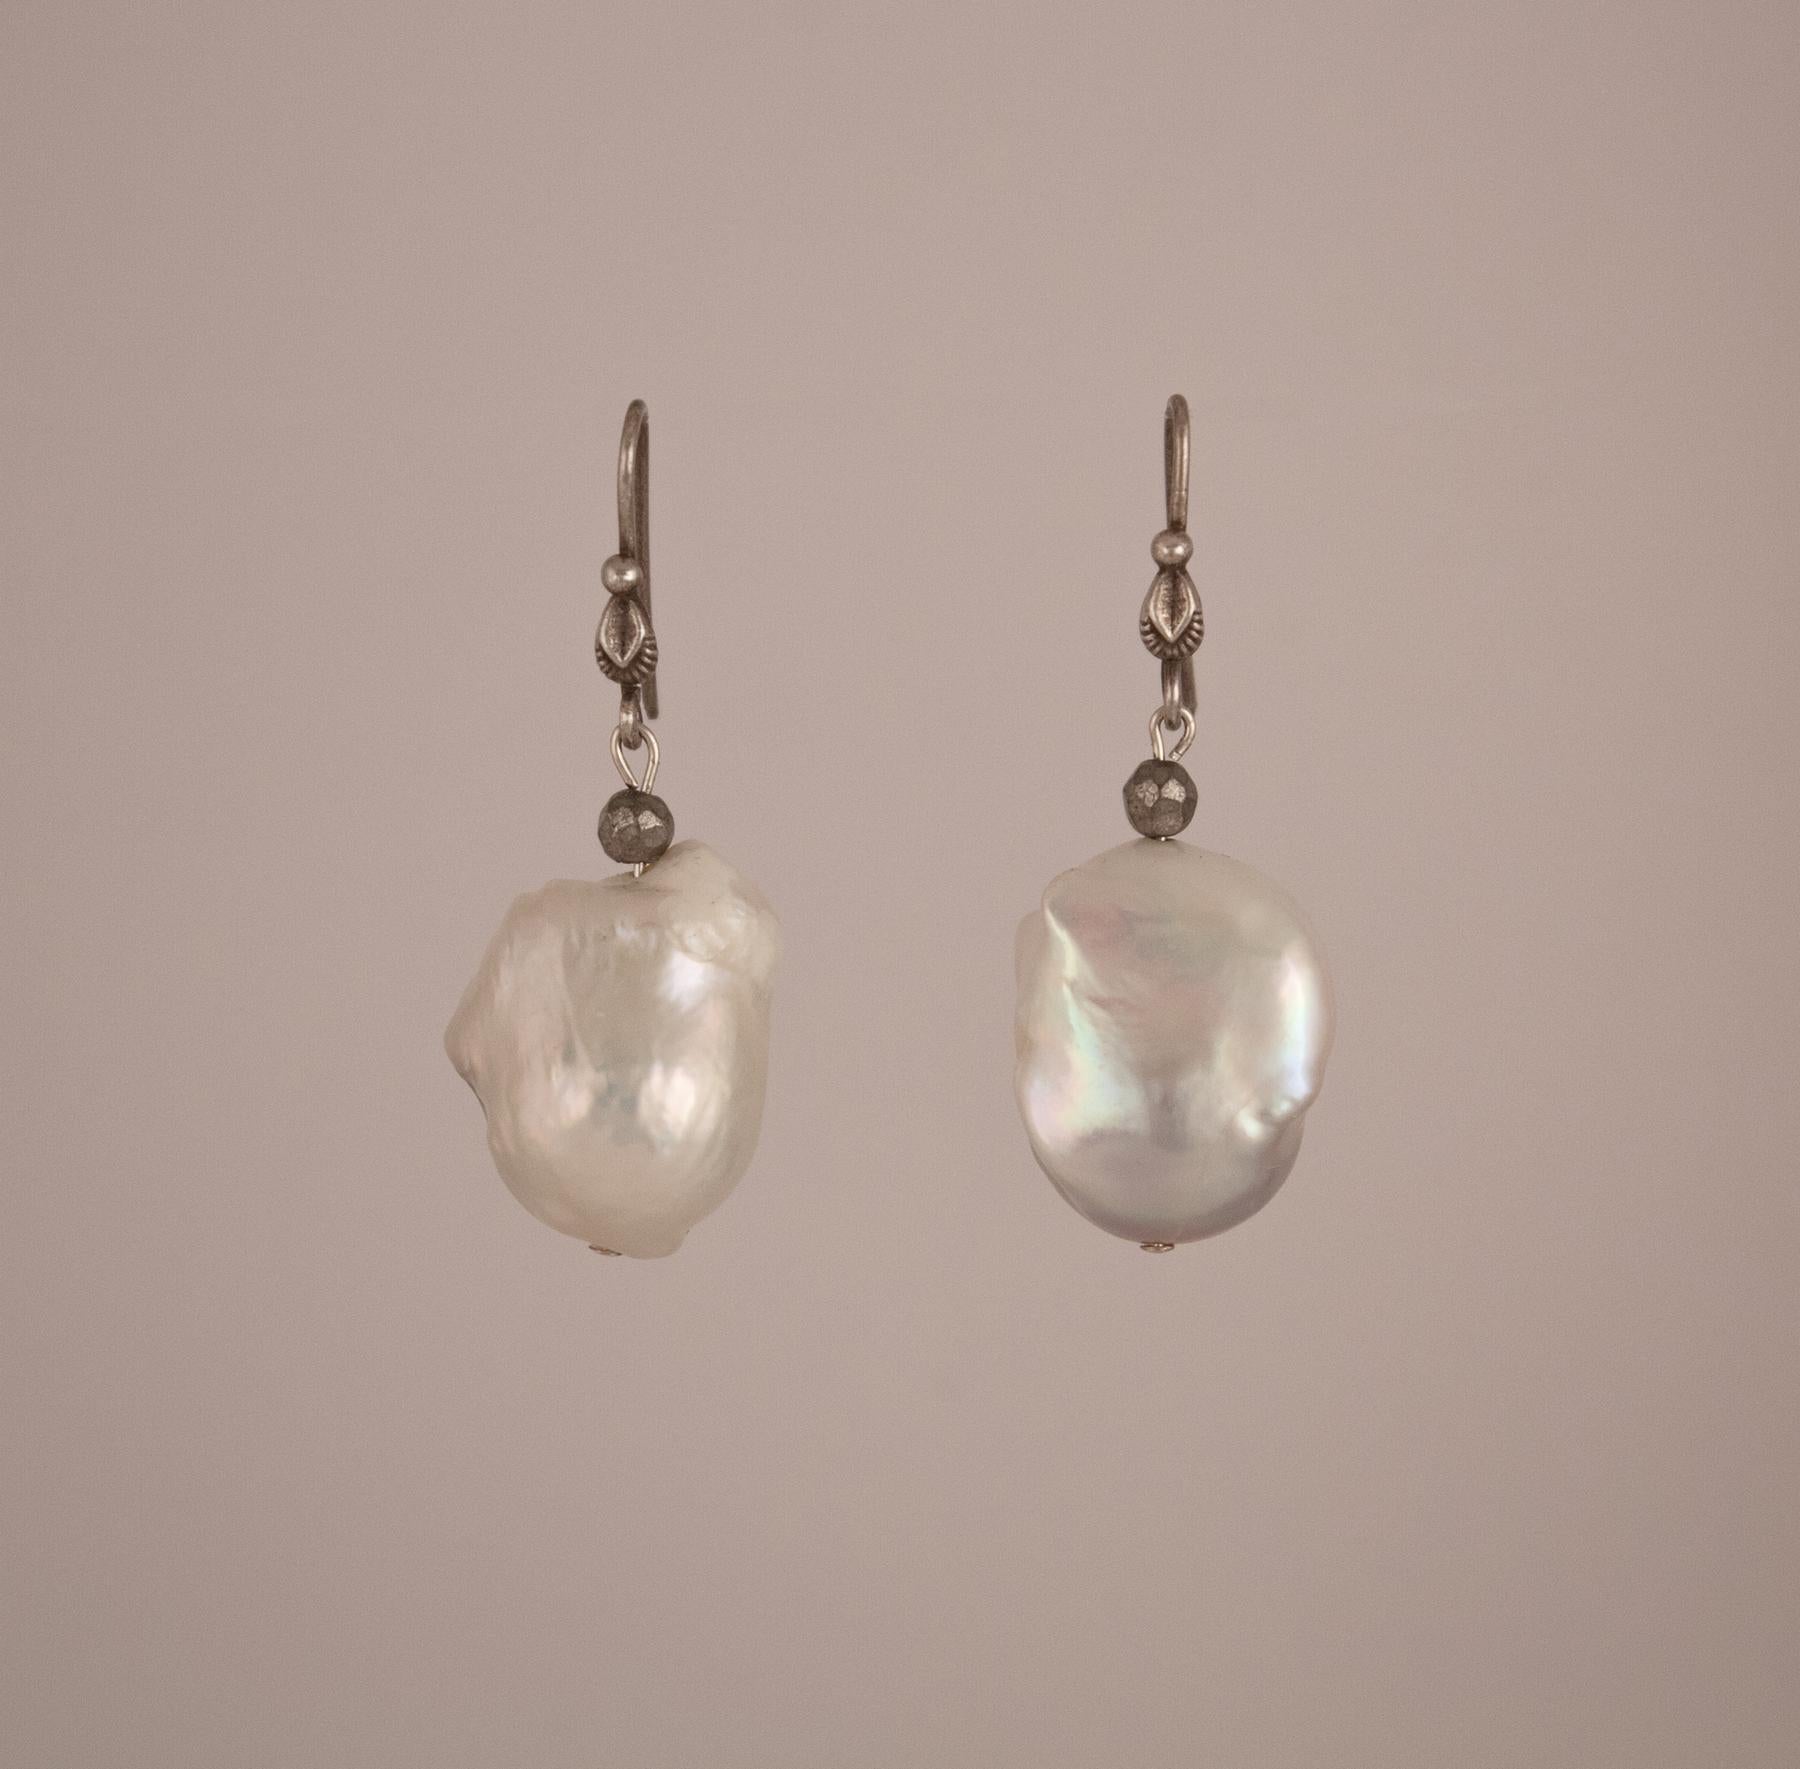 A lovely pair of white baroque pearl dangle earrings on sterling silver wires. The well-matched pearls, which are a wearable size, have beautiful color and luster. The silver findings lend a more casual air to the pair.   